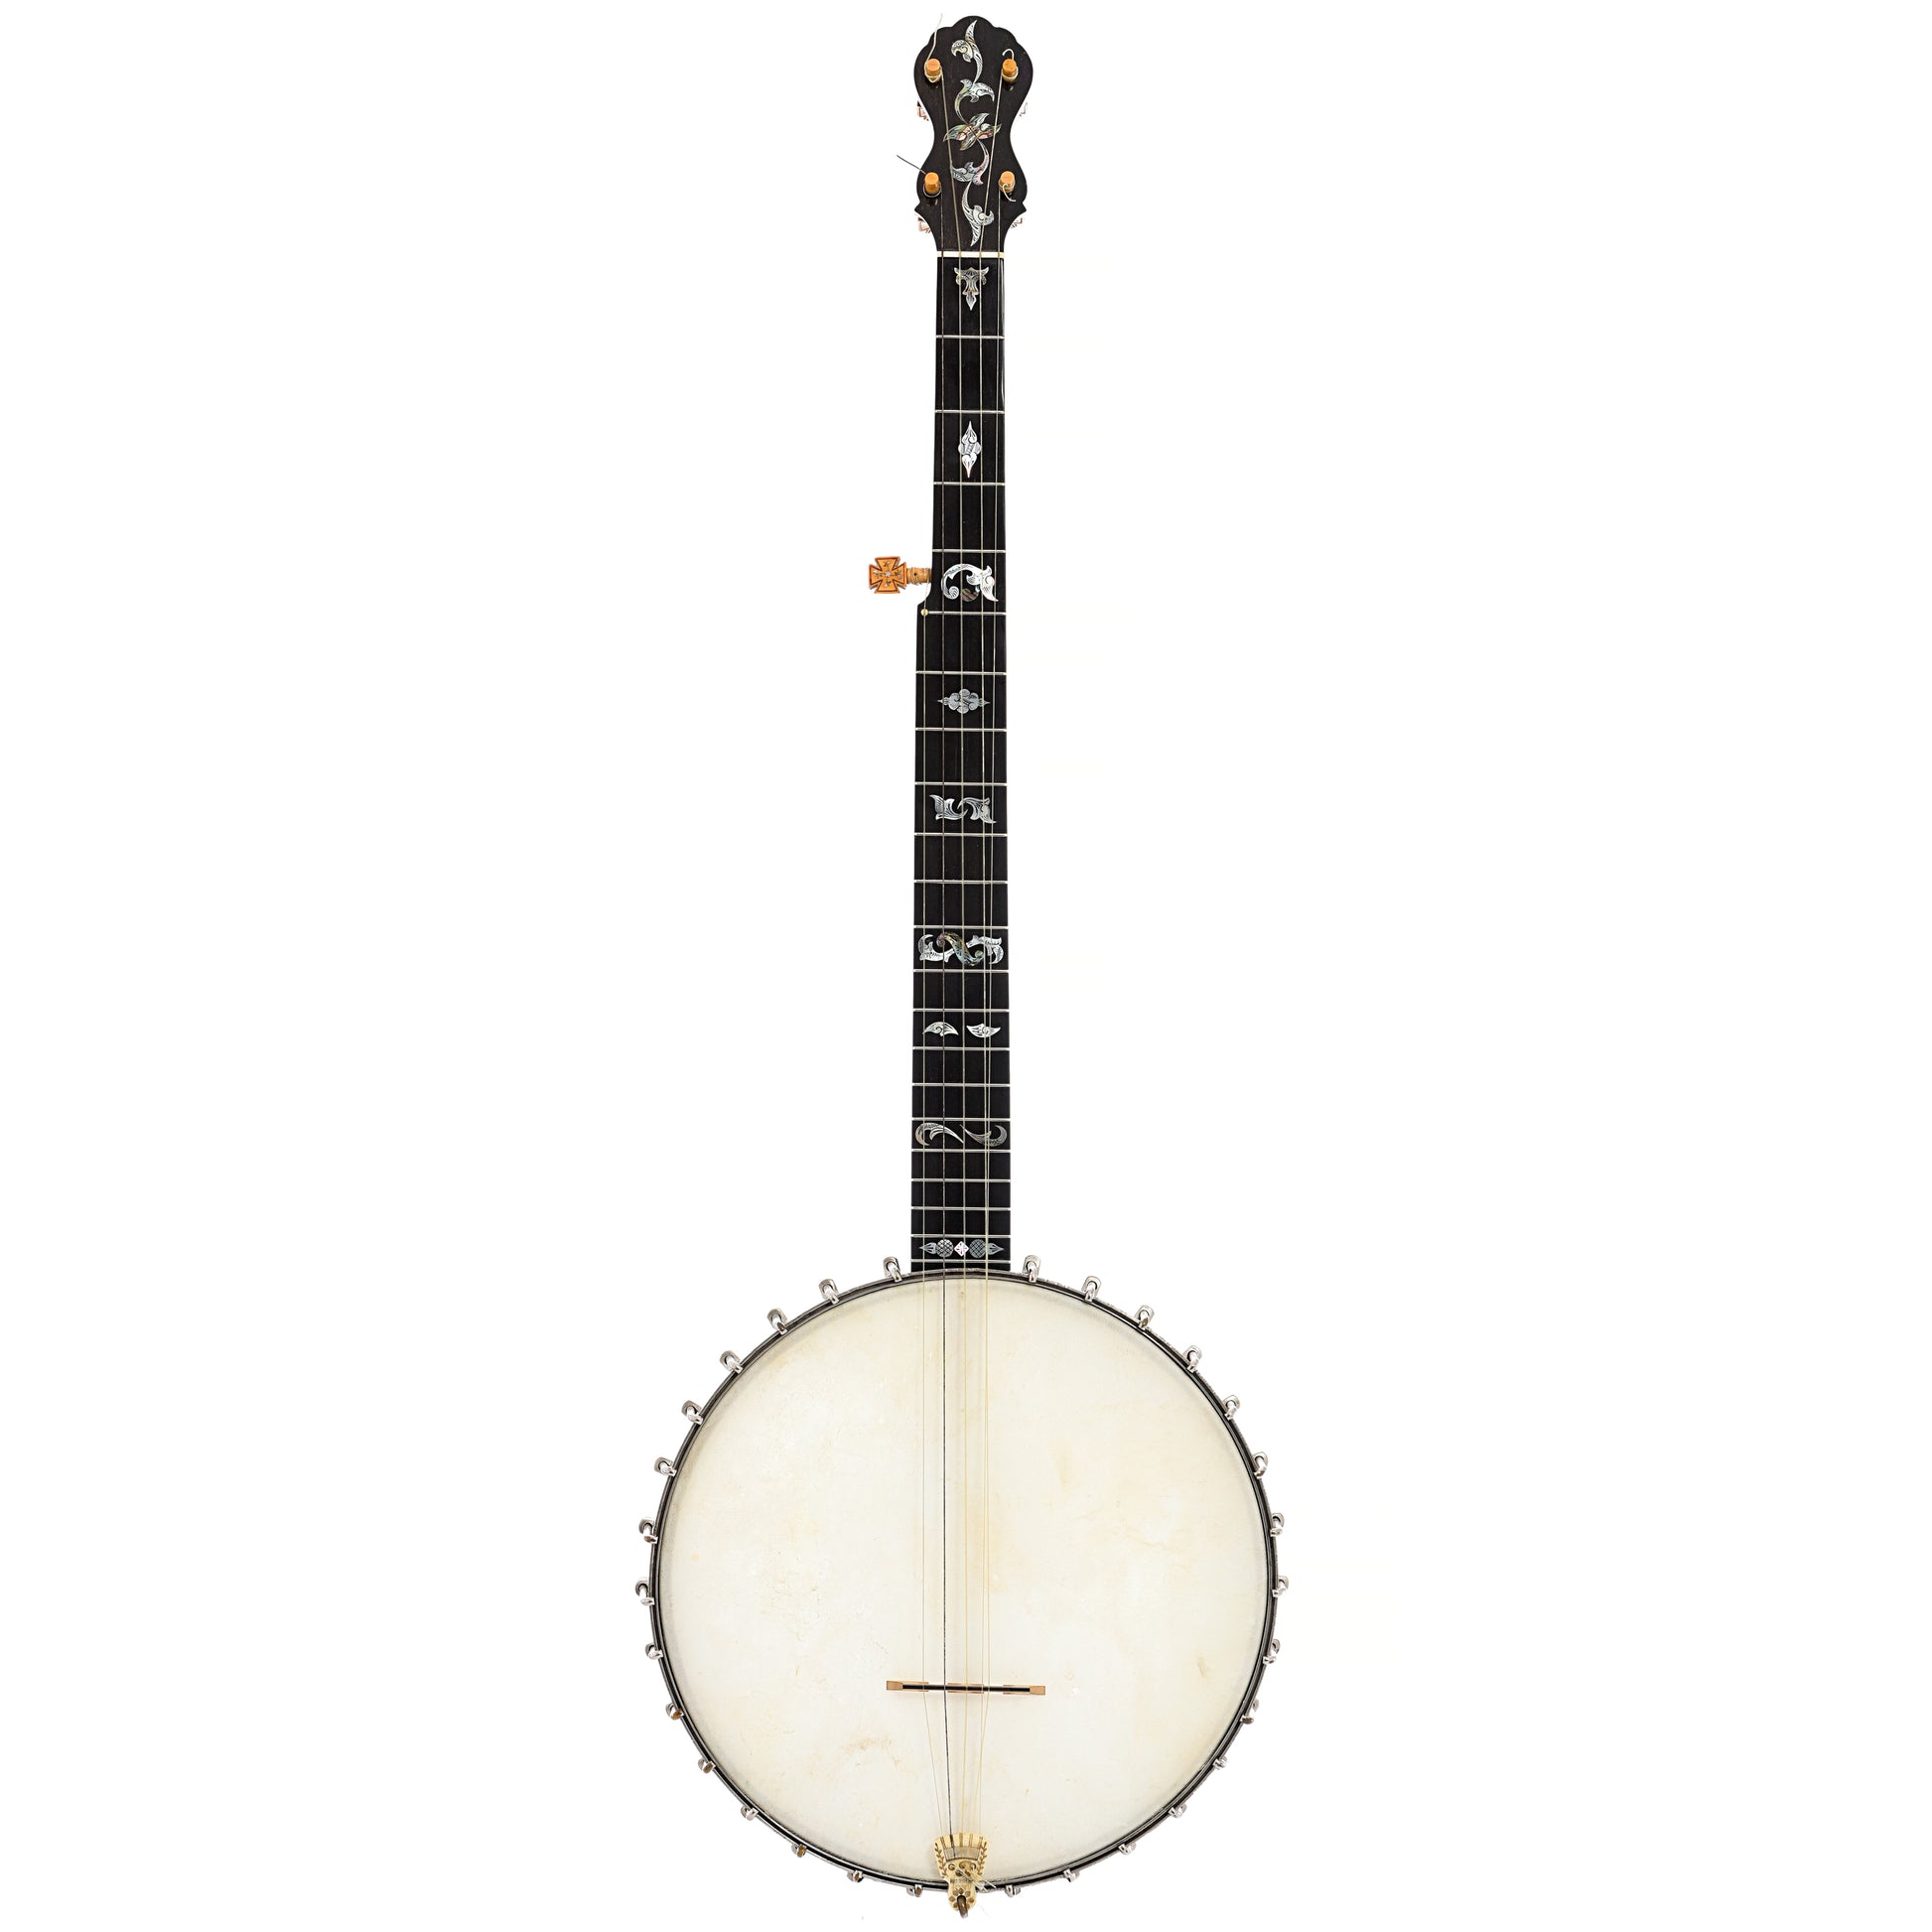 Full front of A.C. Fairbanks Electric #3 Openback Banjo (c.1892-93)